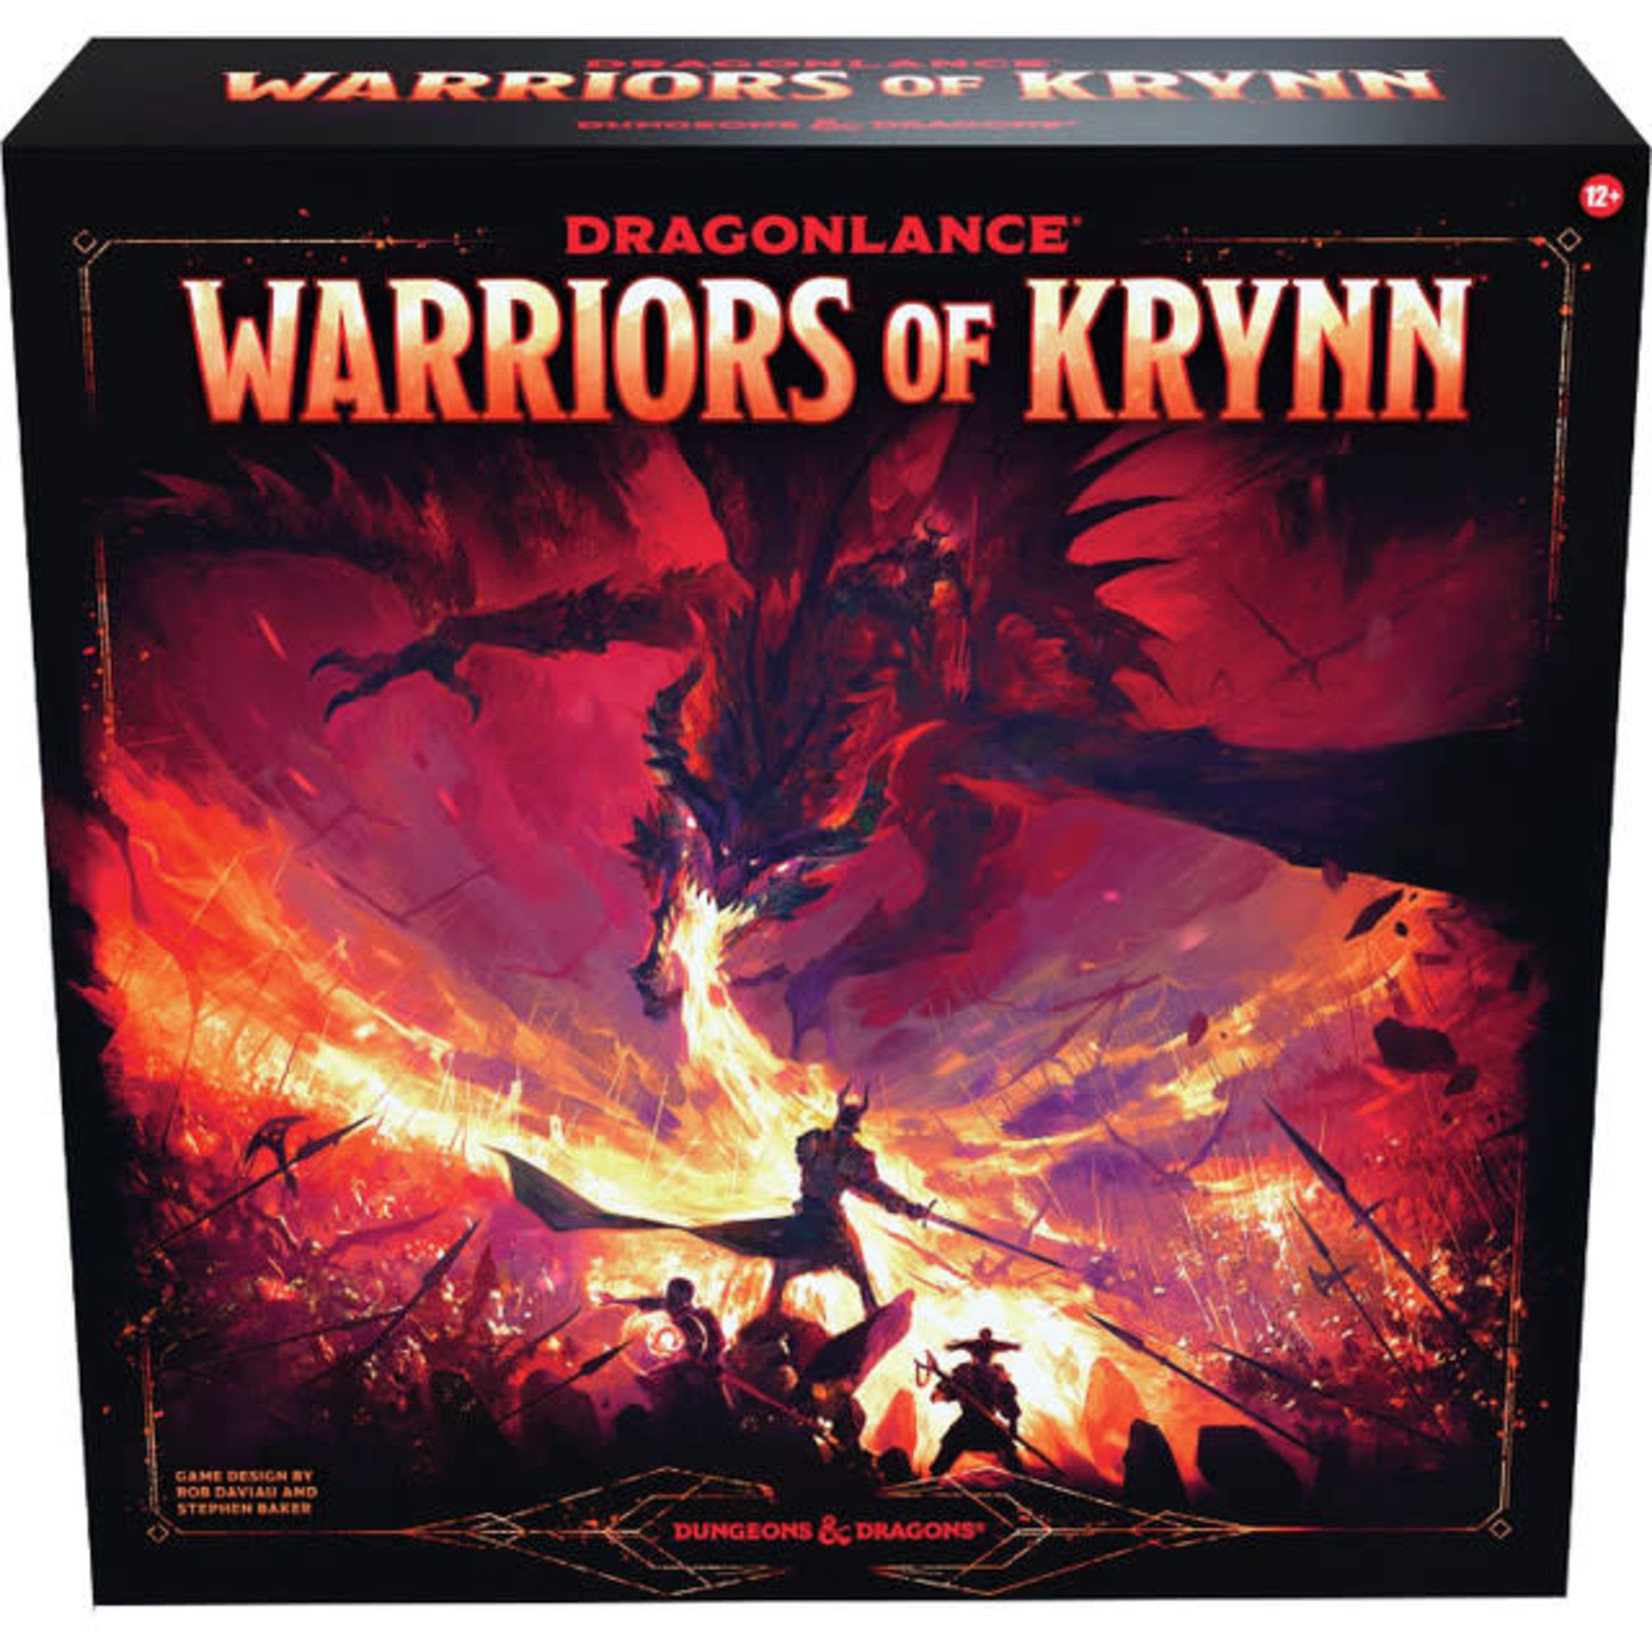 Dungeons and Dragons Dragonlance: Warriors of Krynn